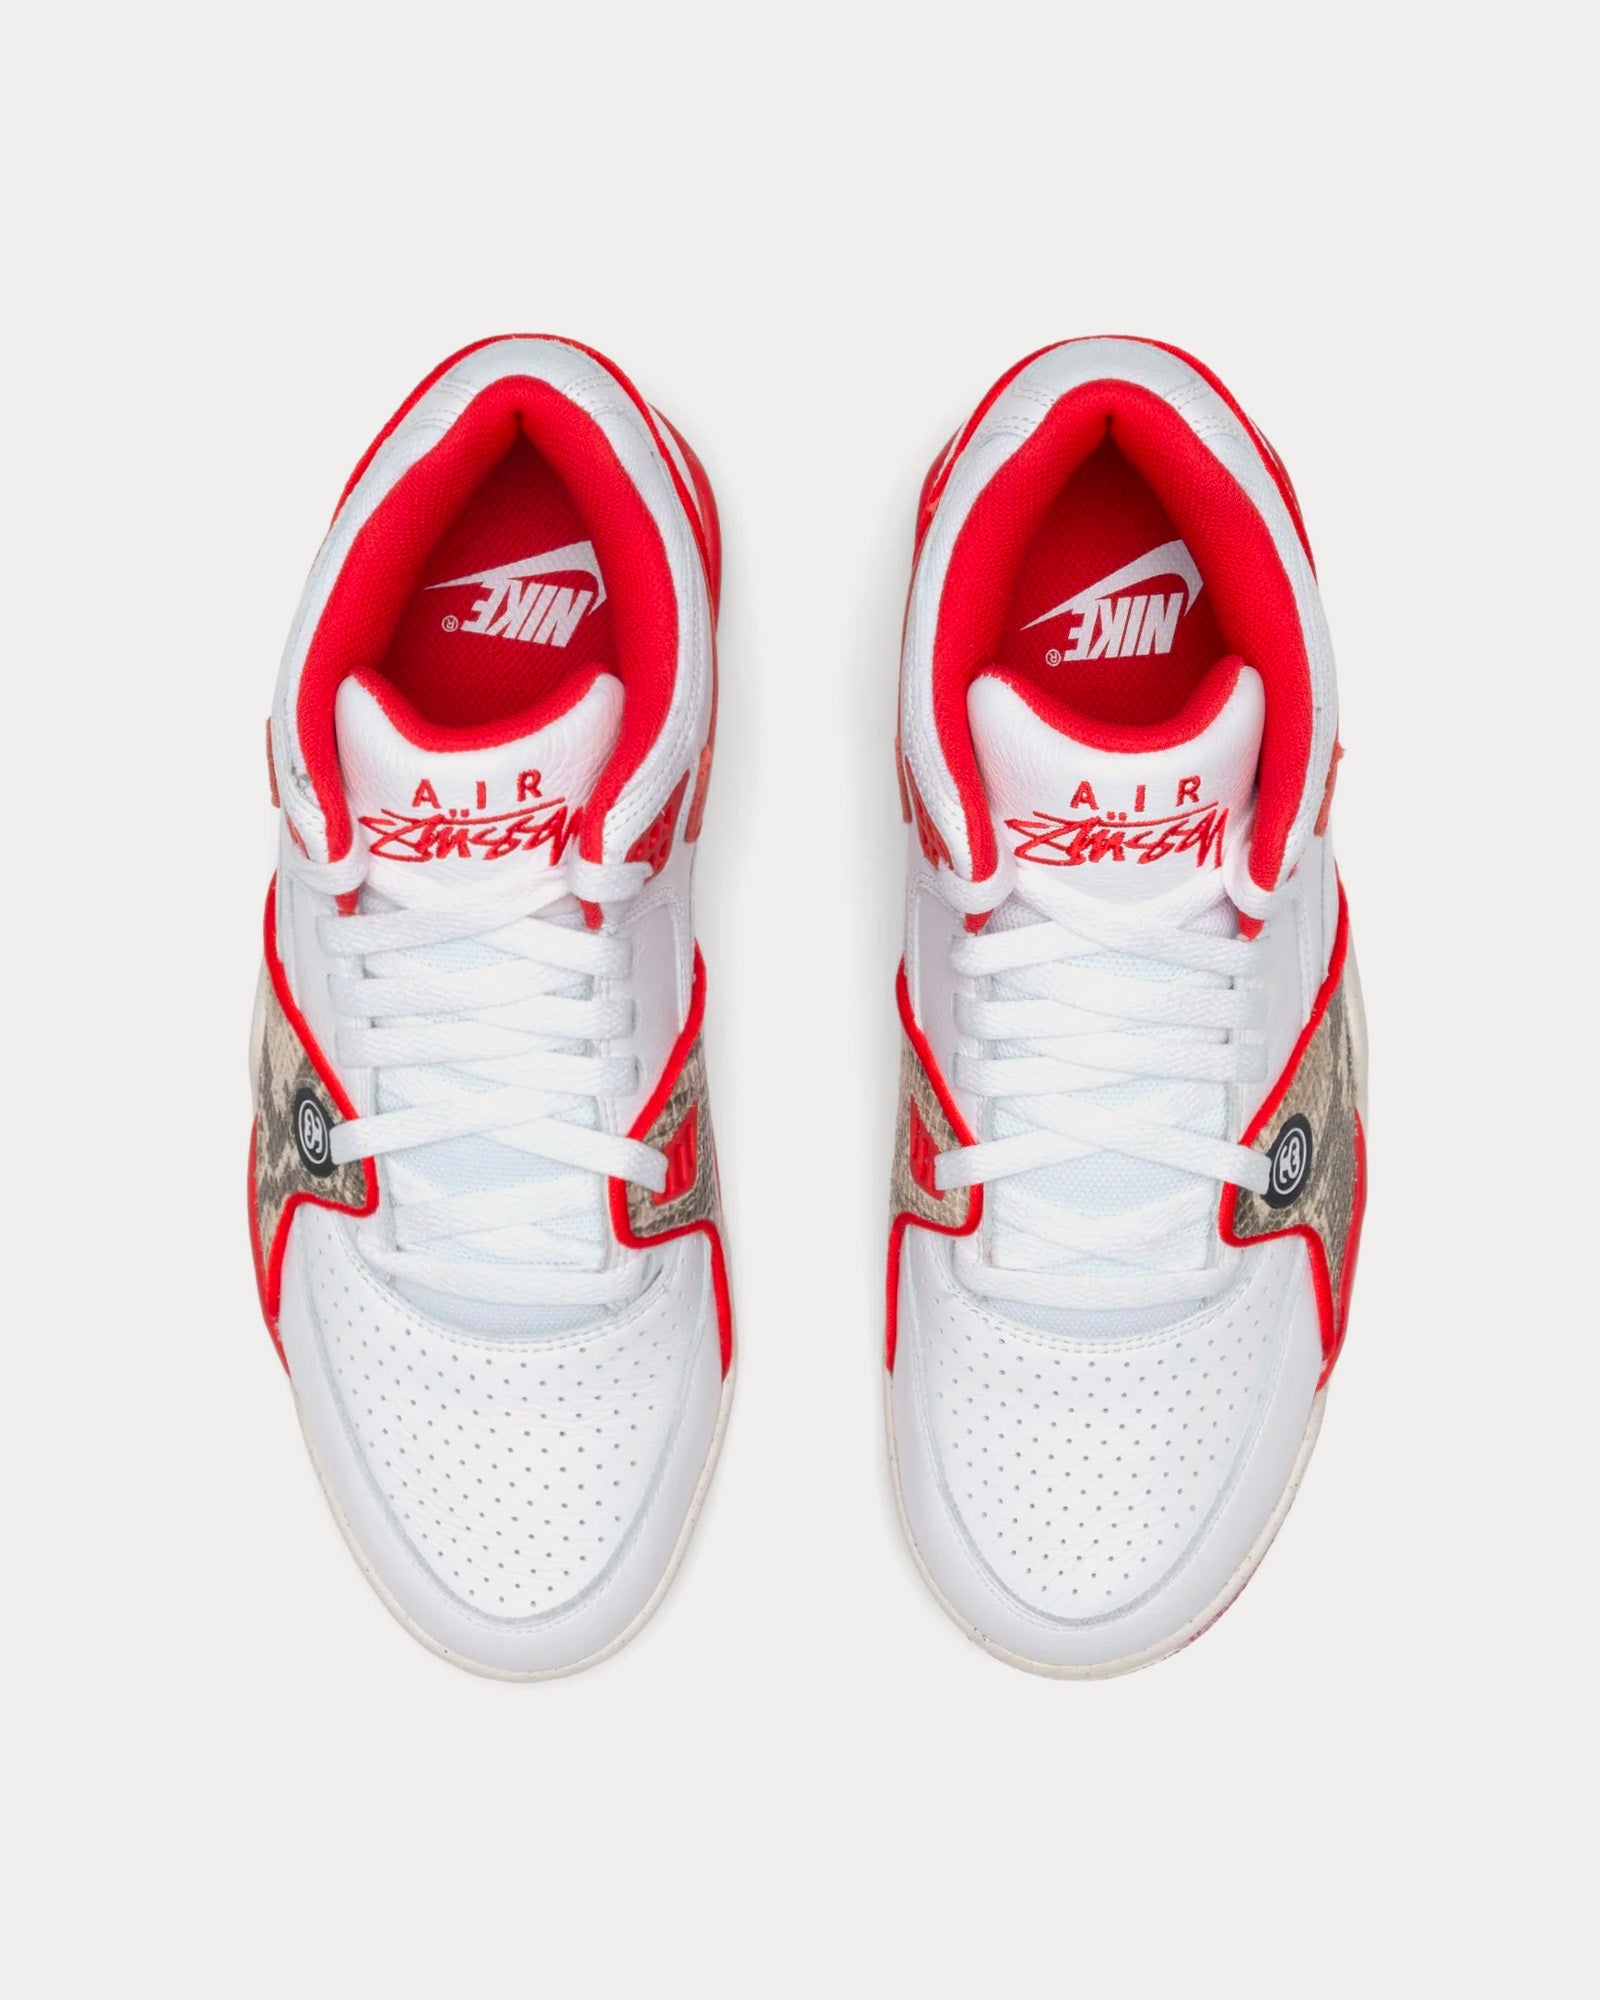 Nike x Stussy - Air Flight '89 Low White / Habanero Red / Sail Low Top Sneakers